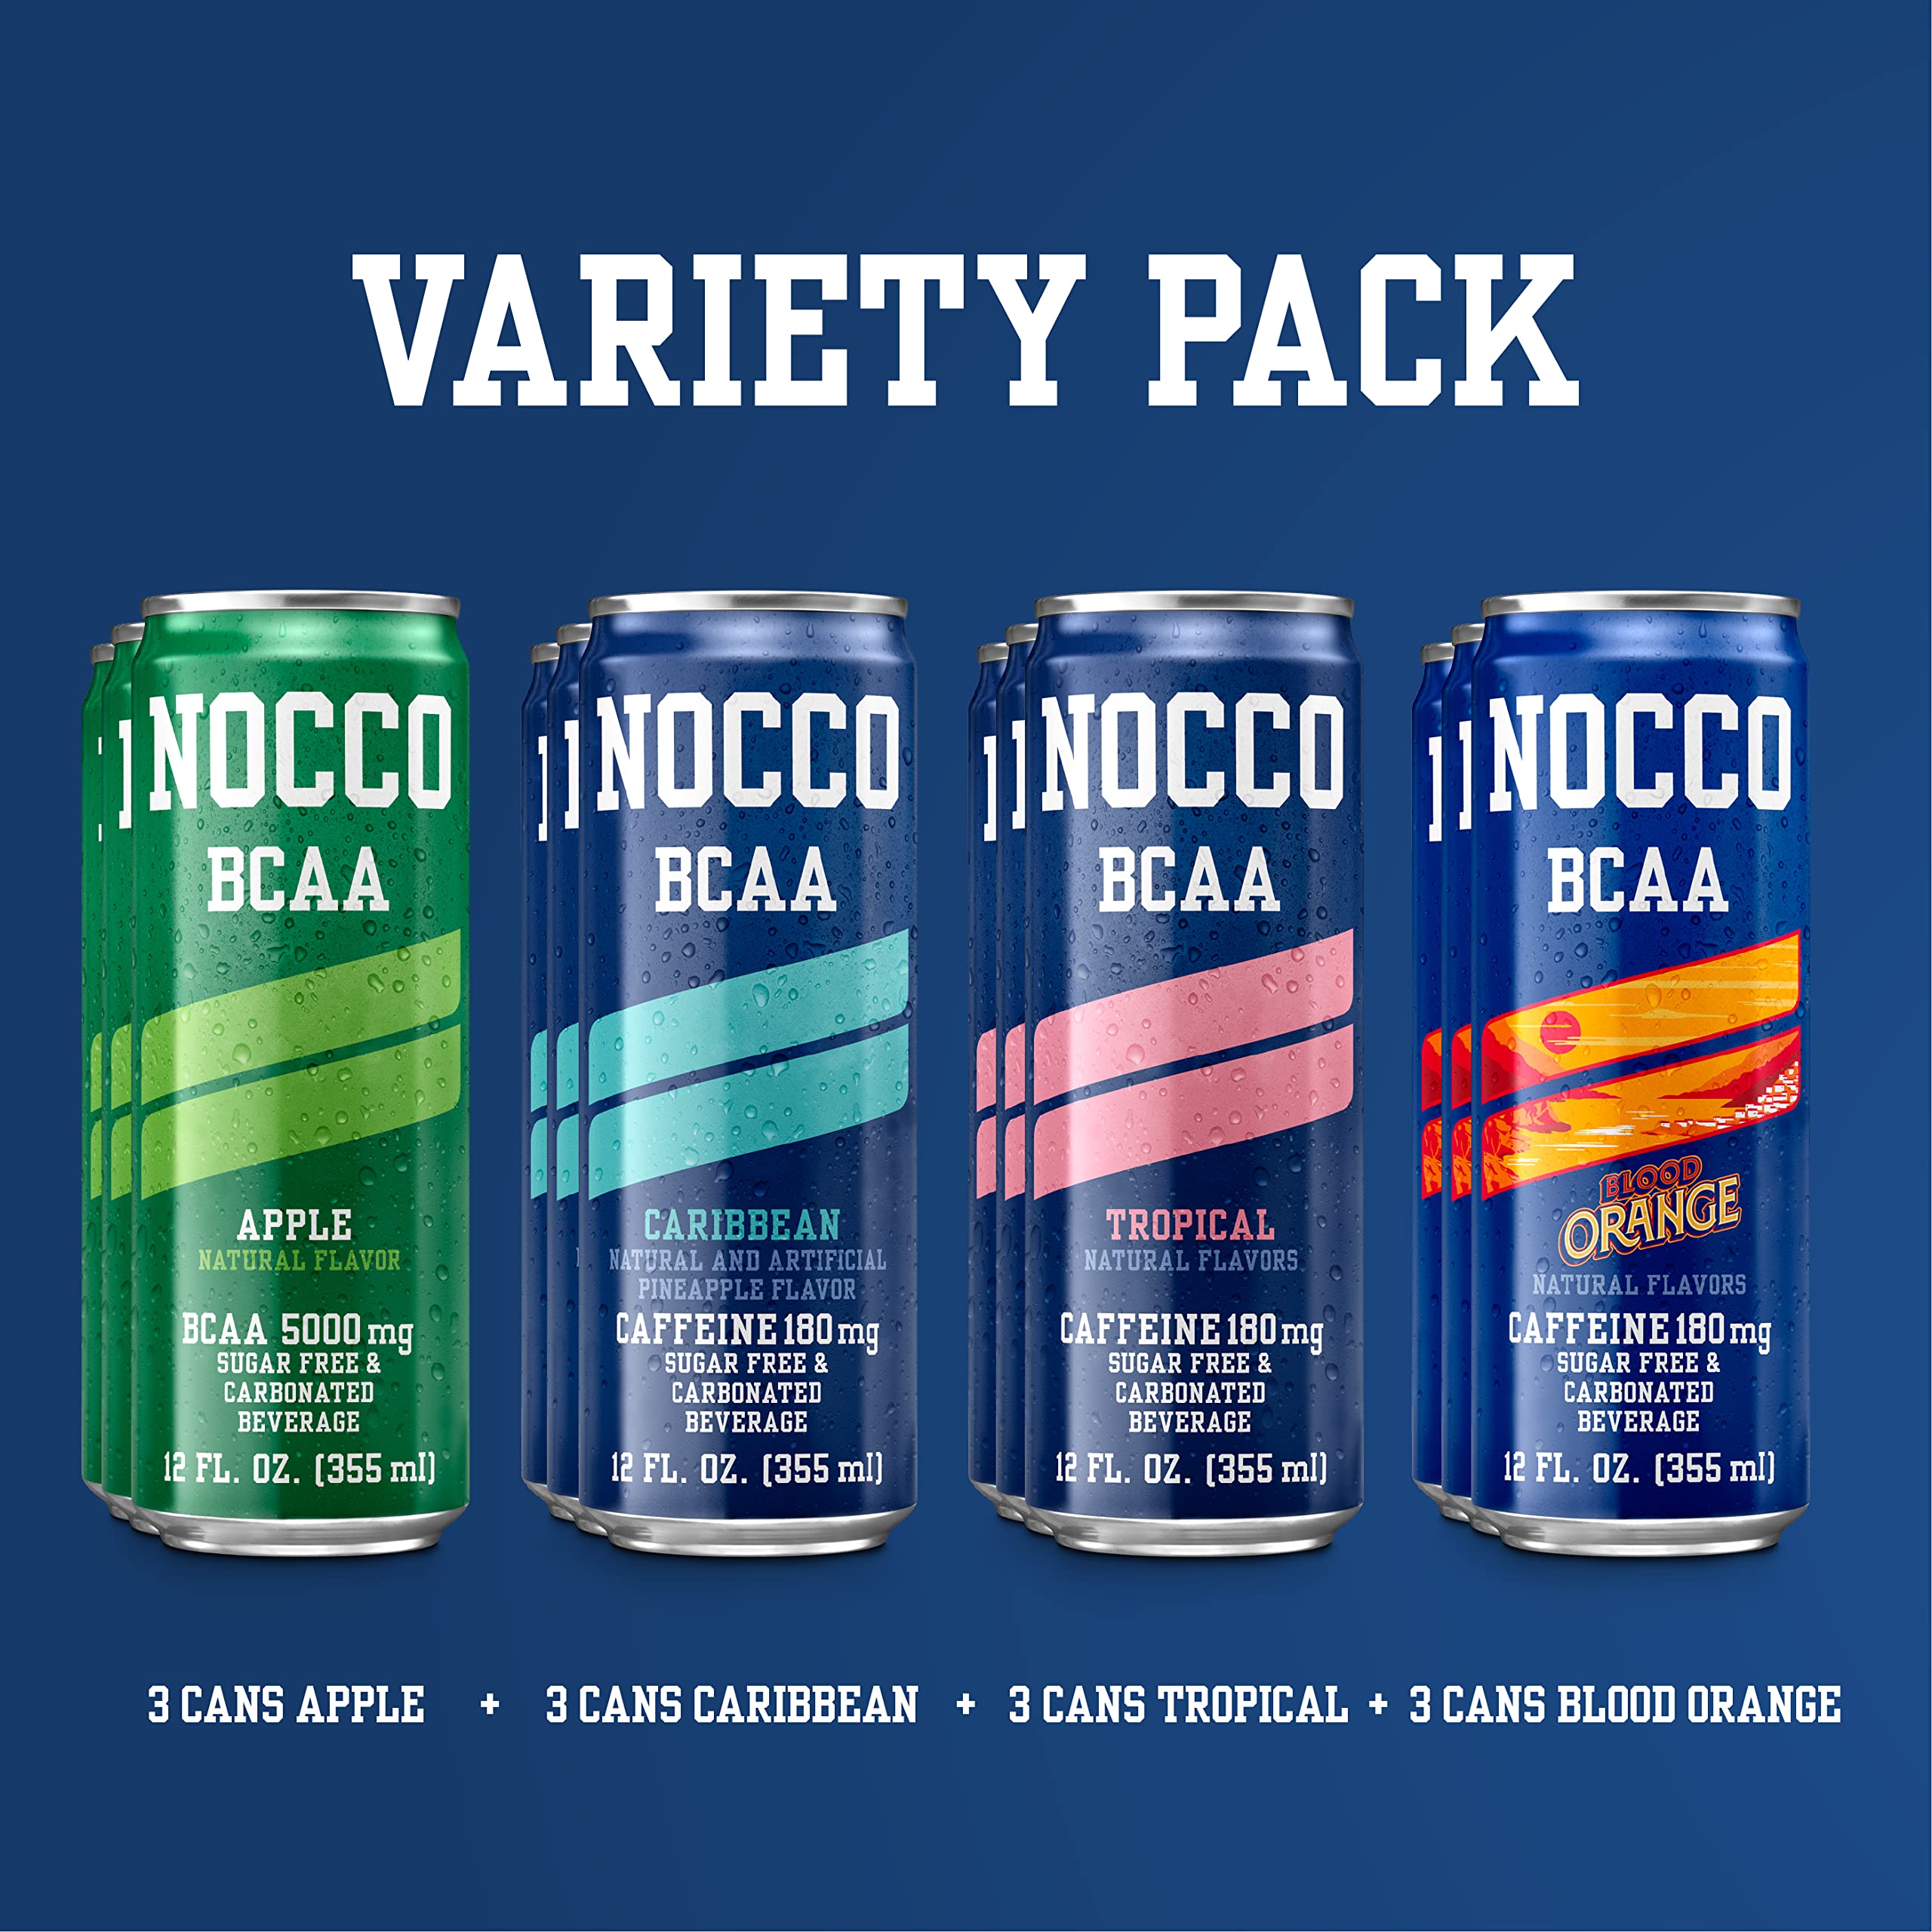 NOCCO BCAA Energy Drink Variety Pack - 12 Fl Oz (Pack of 12) - Sugar Free Caffeinated & Decaf Drink - Carbonated & Low Calorie with BCAAs, Vitamin B6, B12, & Biotin - Grab & Go Performance Drinks